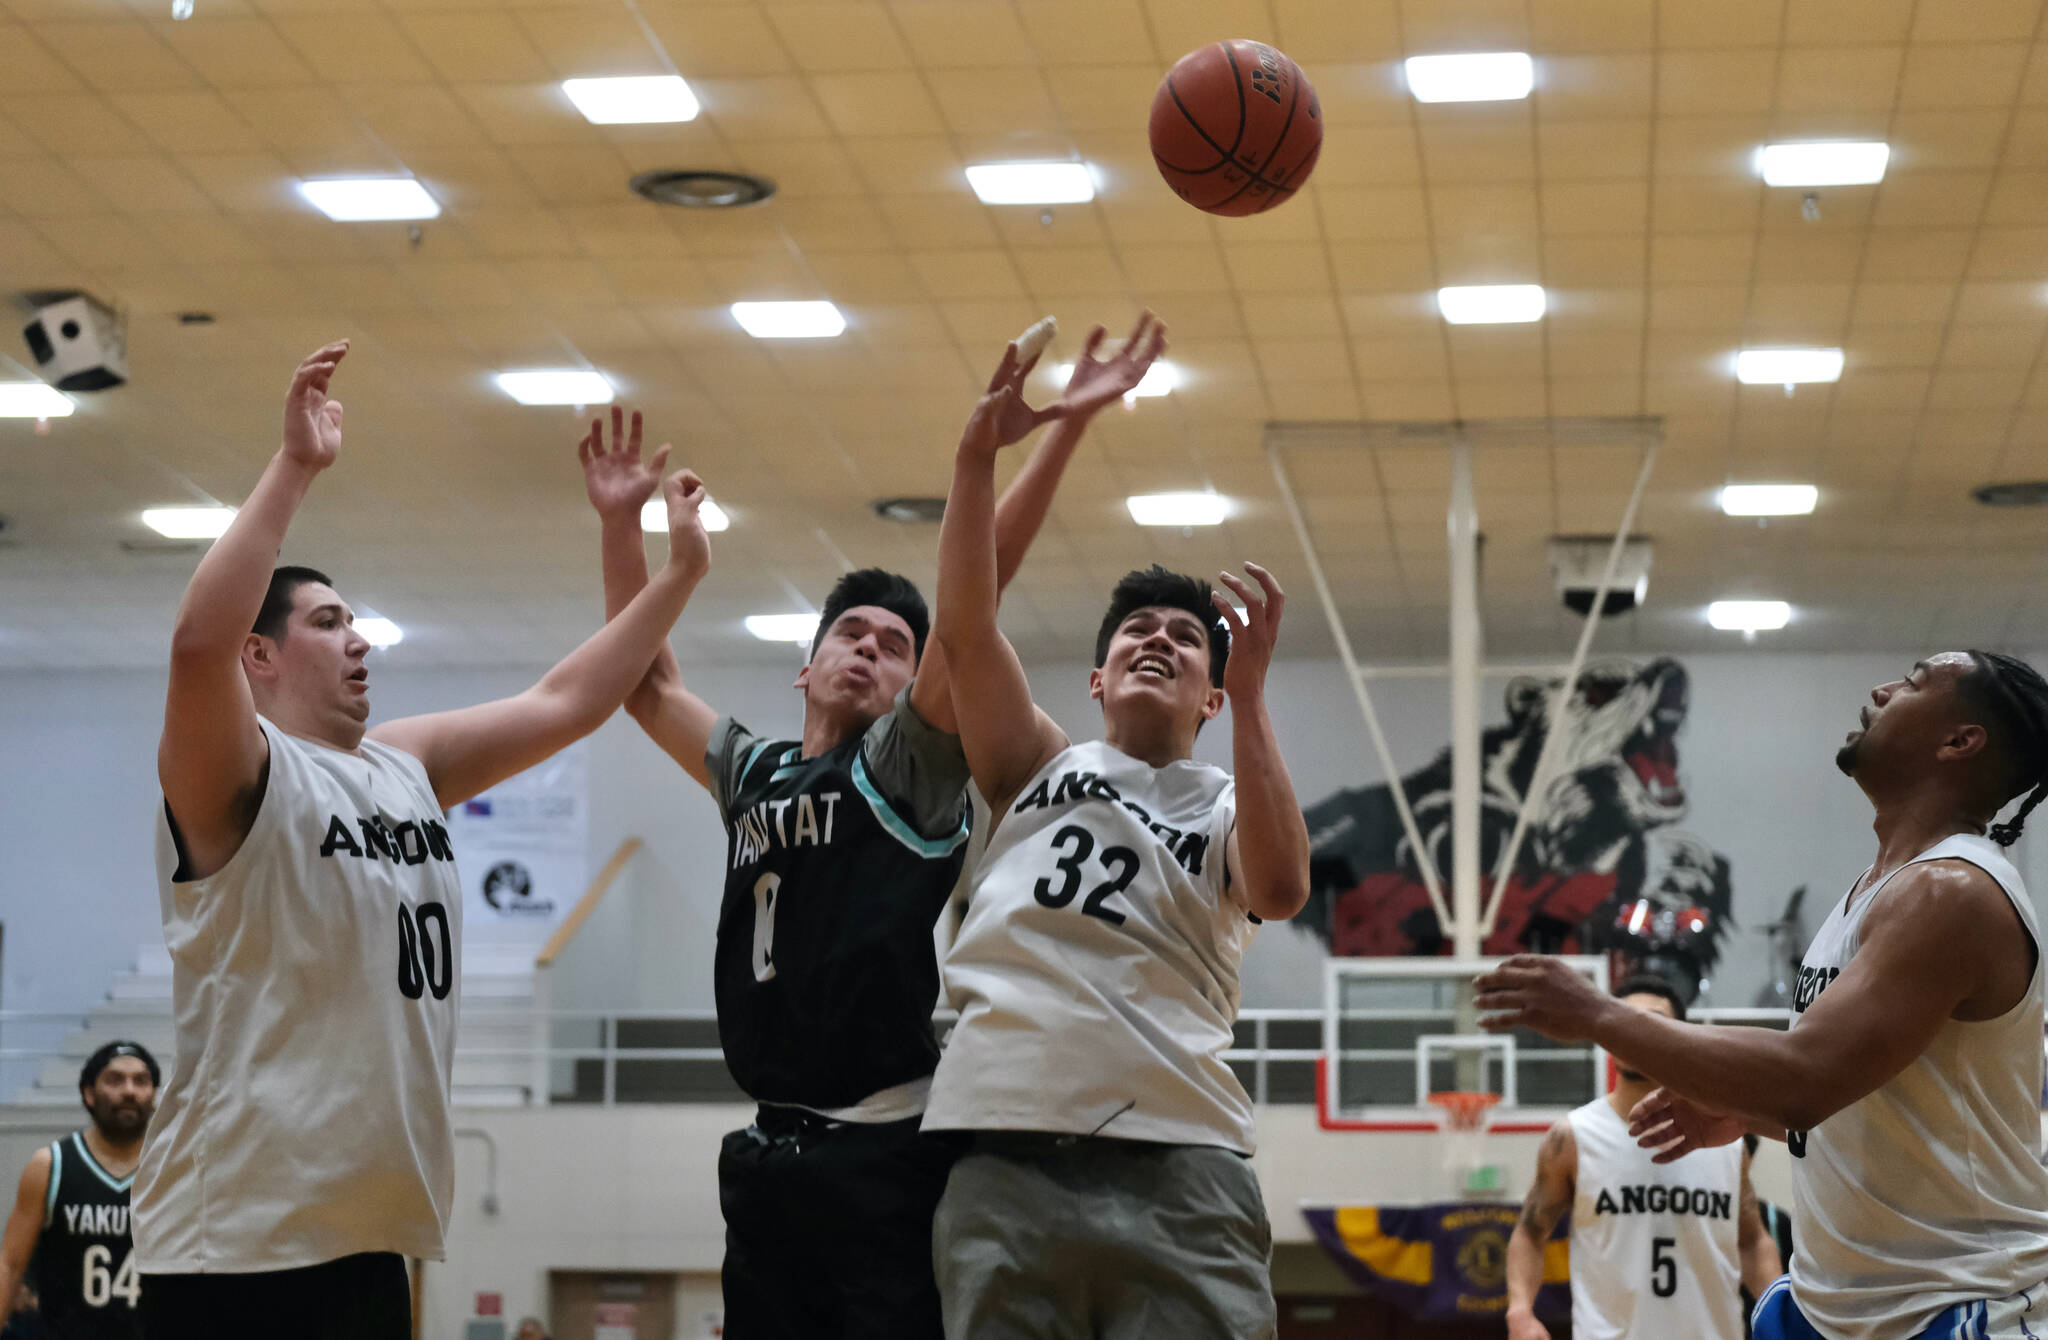 Angoon’s Kendrick Payton (00) and Anthony Snow (32) battle for a rebound with Yakutat’s Josh James (0) during the Gold Medal tournament, Tuesday, March 21, at Juneau-Douglas High School: Yadaa.at Kalé. (Klas Stolpe / For the Juneau Empire)